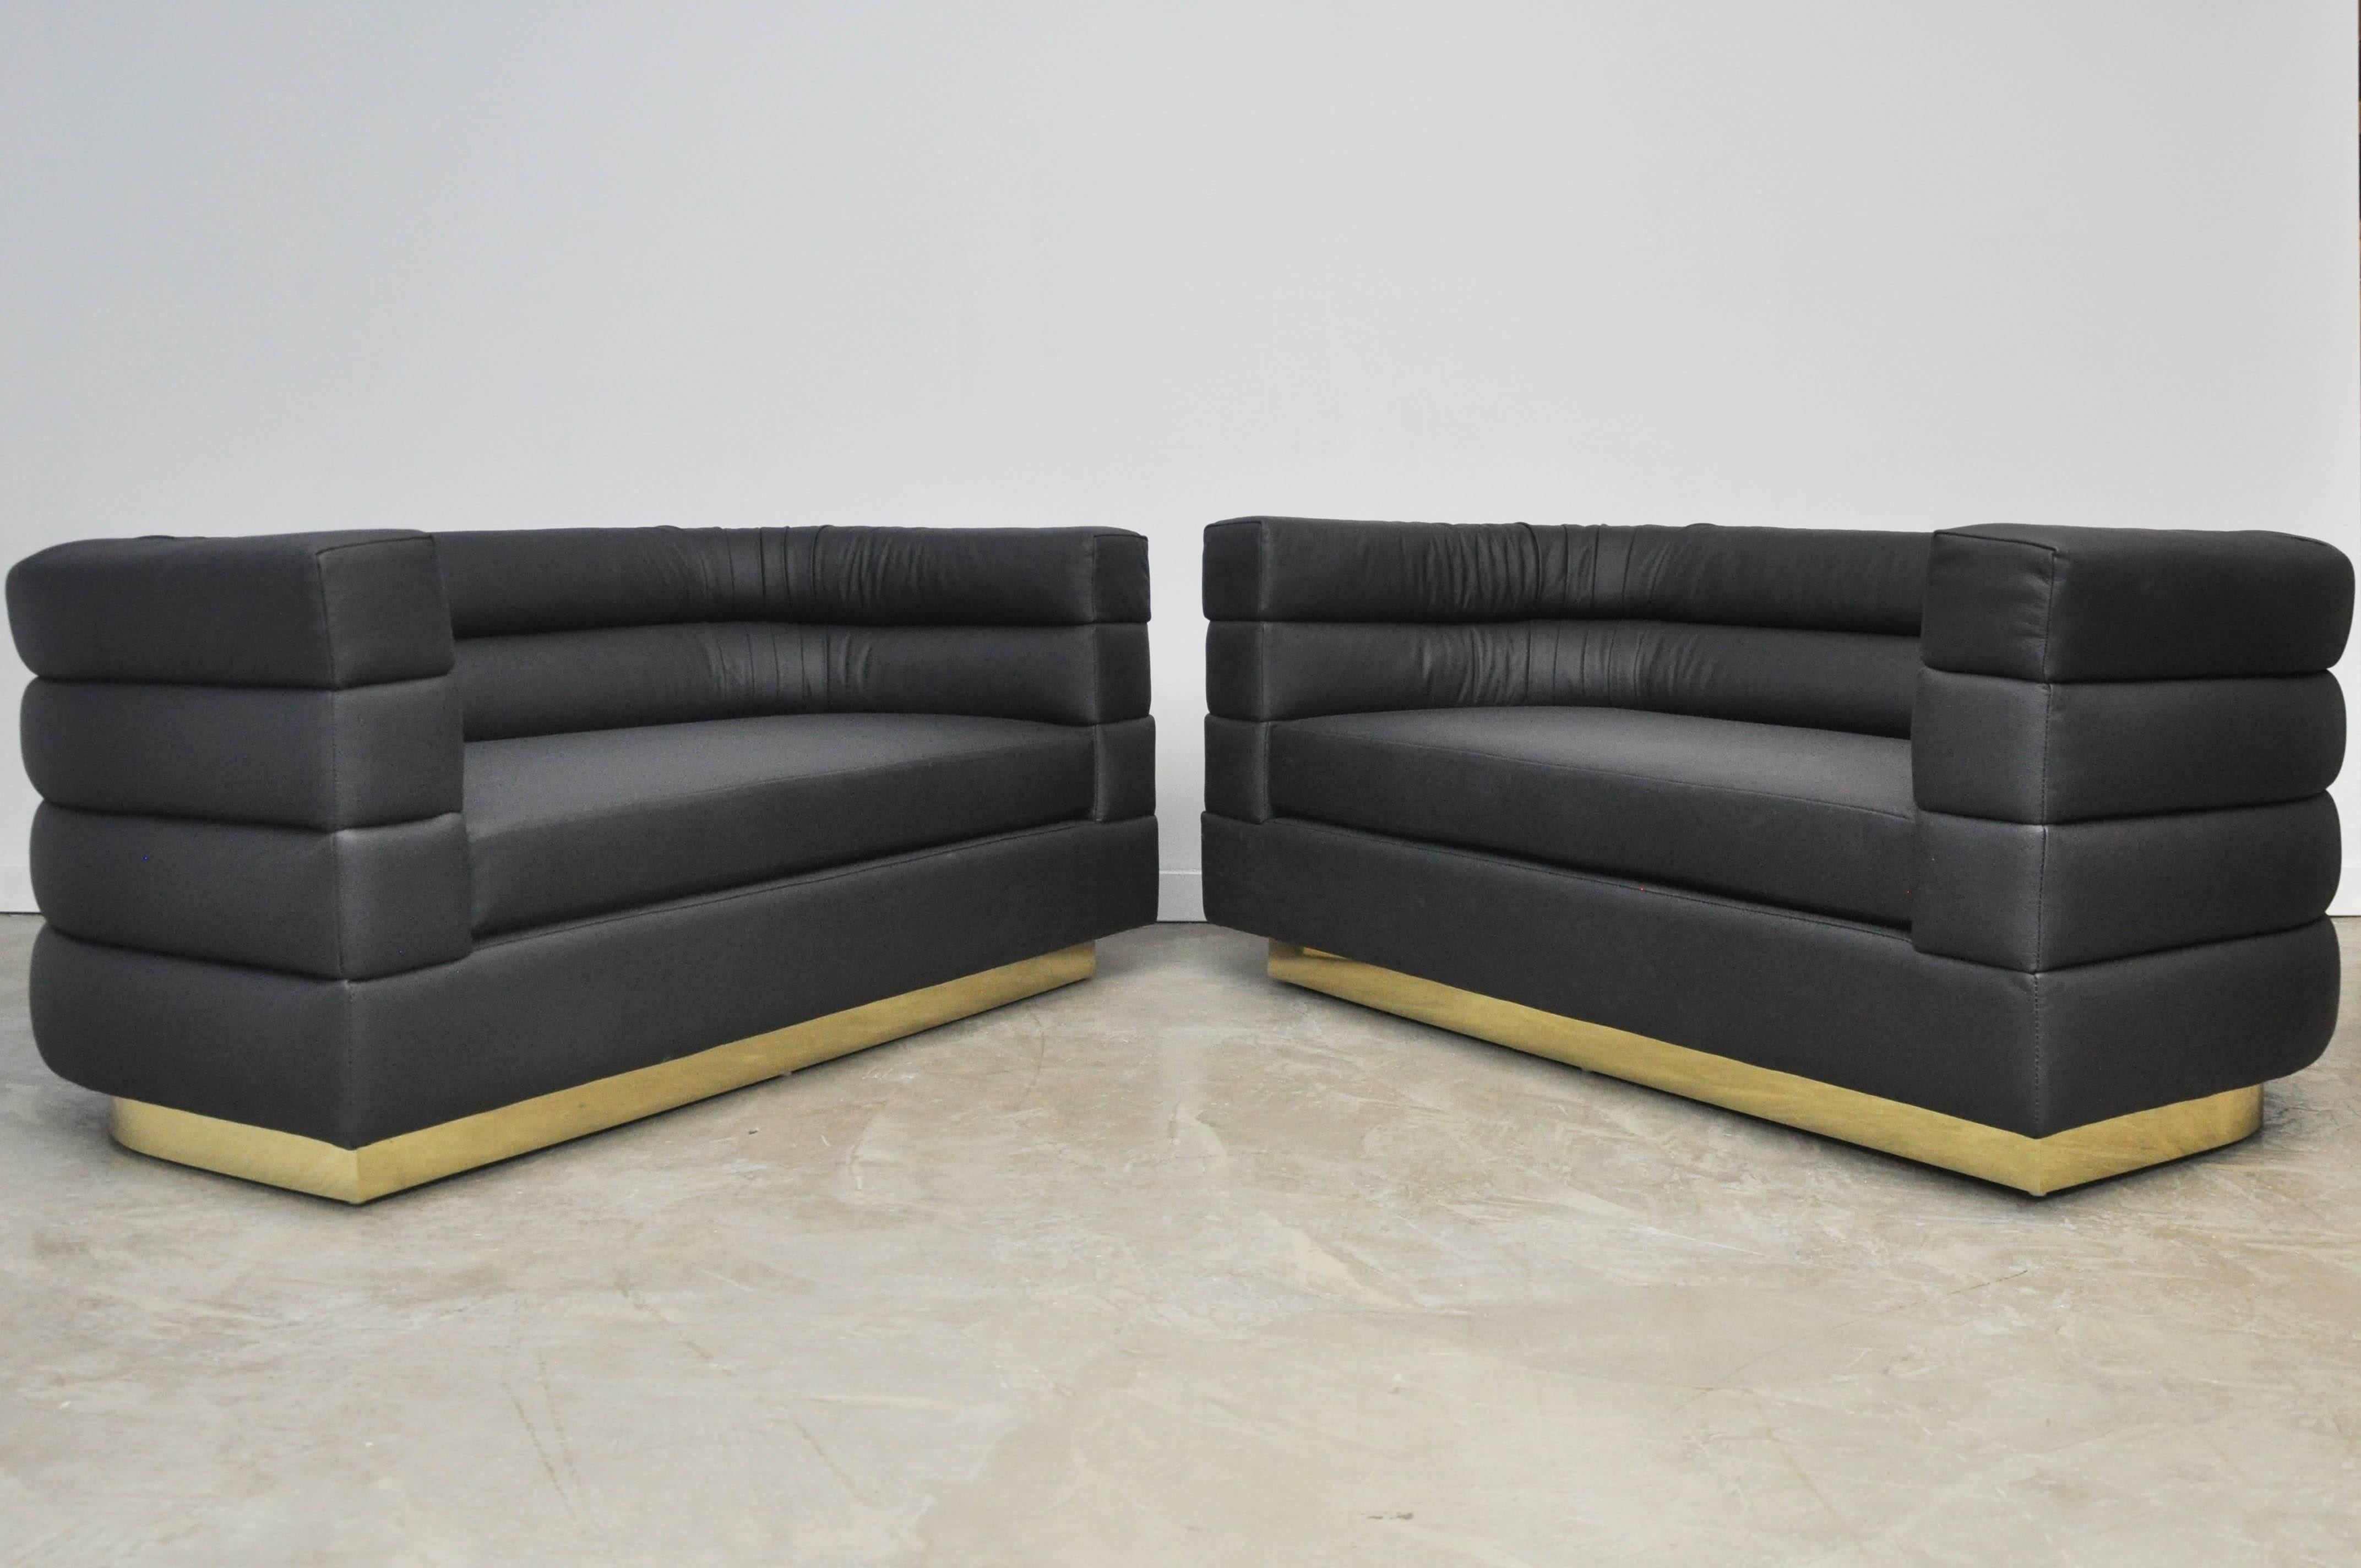 Pair of black leather settees on brass bases by Design Studio, circa 1970. New leather upholstery.